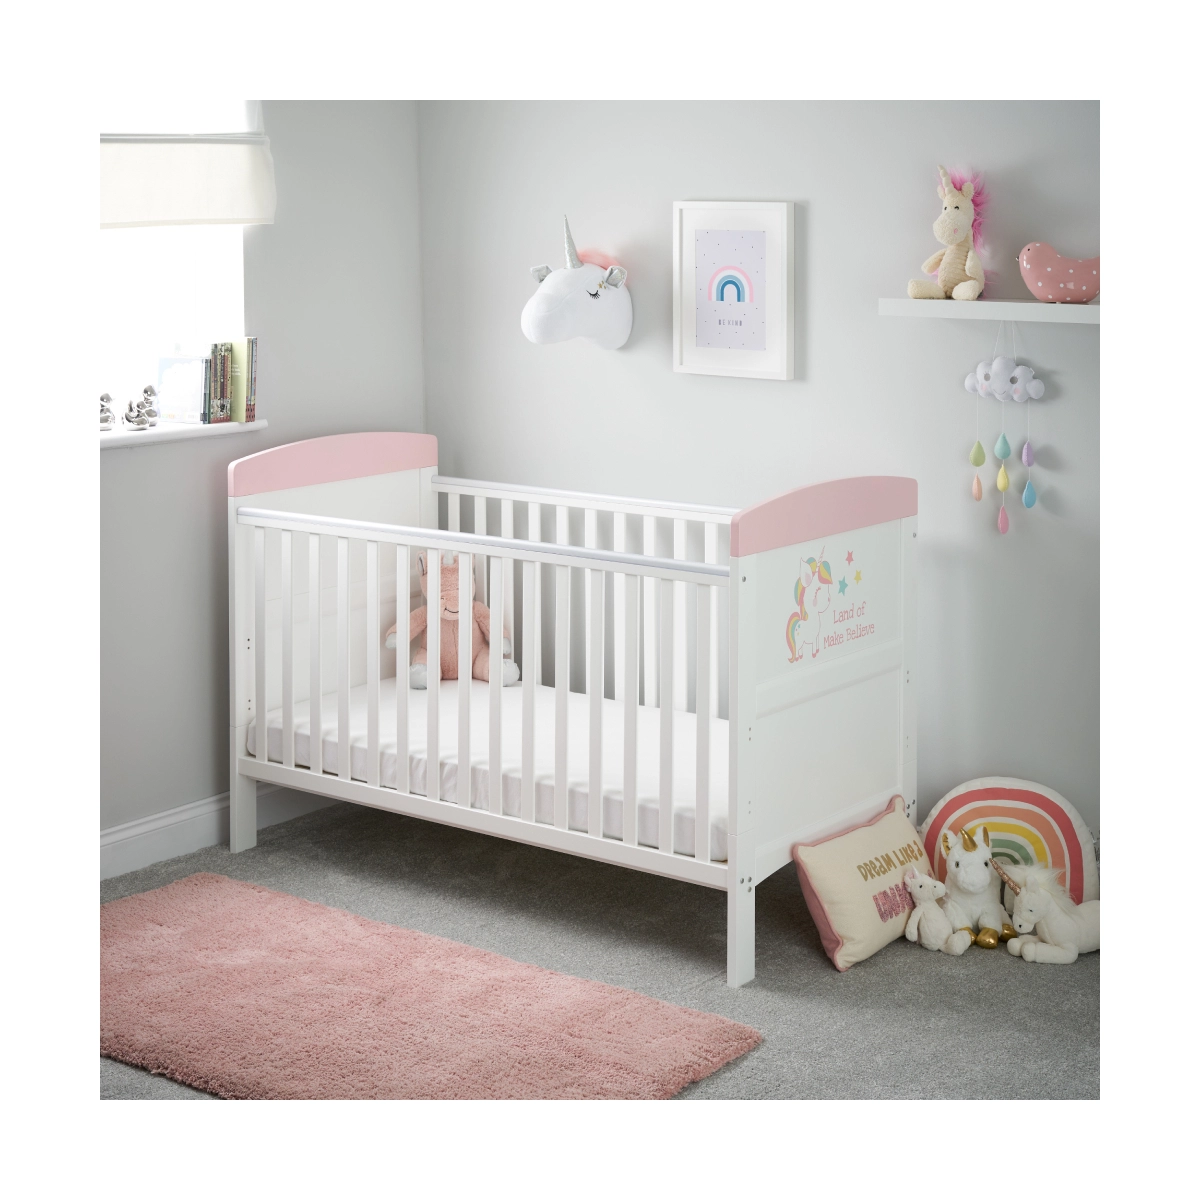 Image of OBaby Grace Inspire Cot Bed-Unicorn